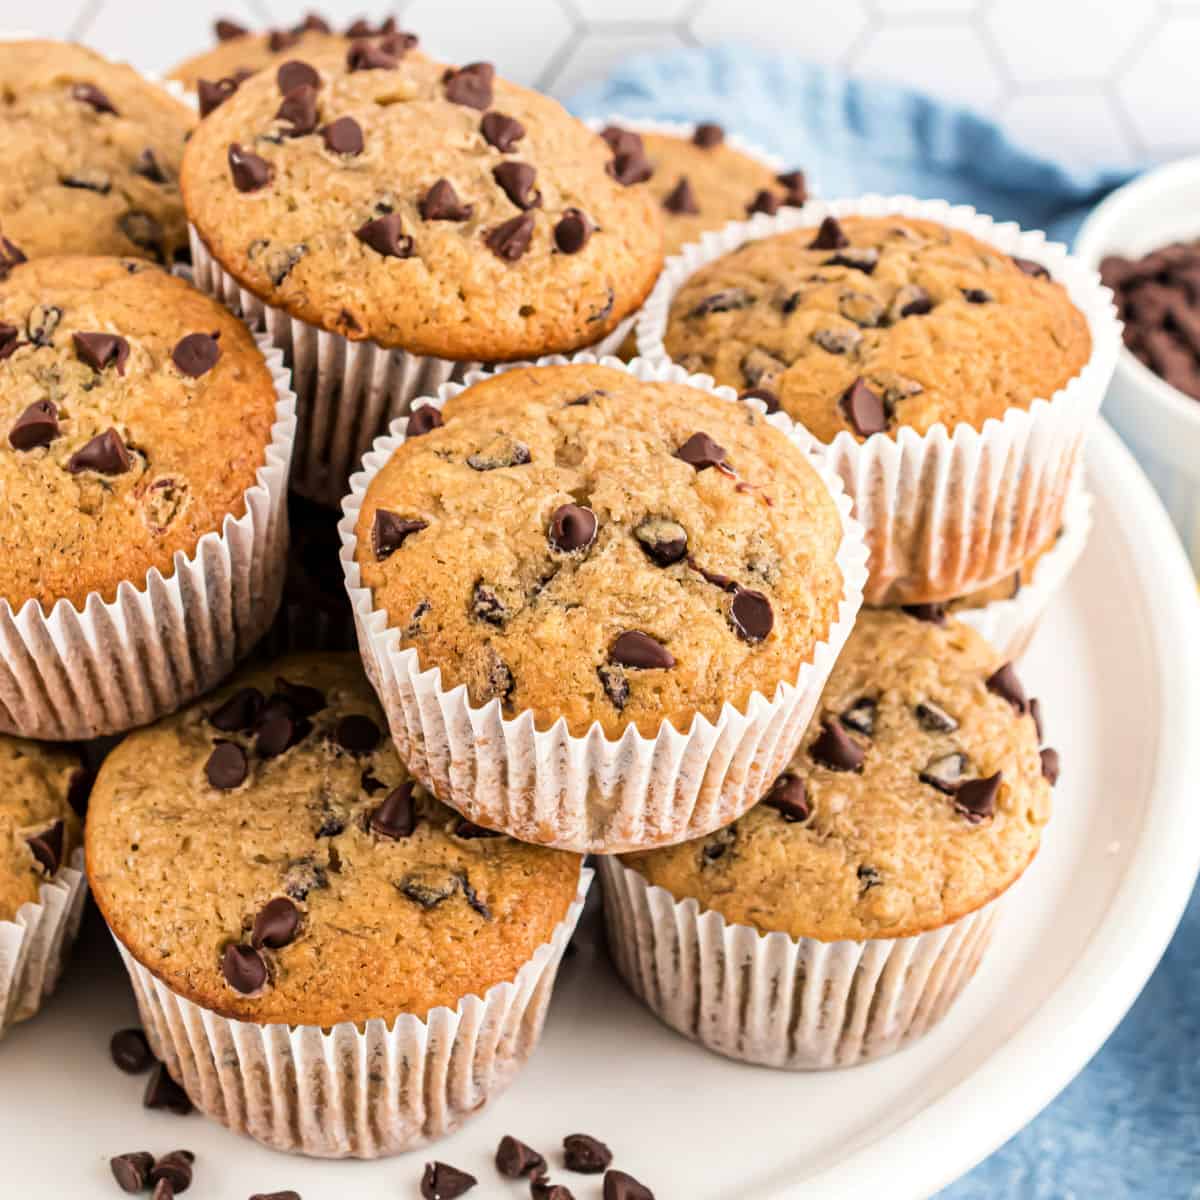 Stack of muffins on white cake plate with chocolate chips.